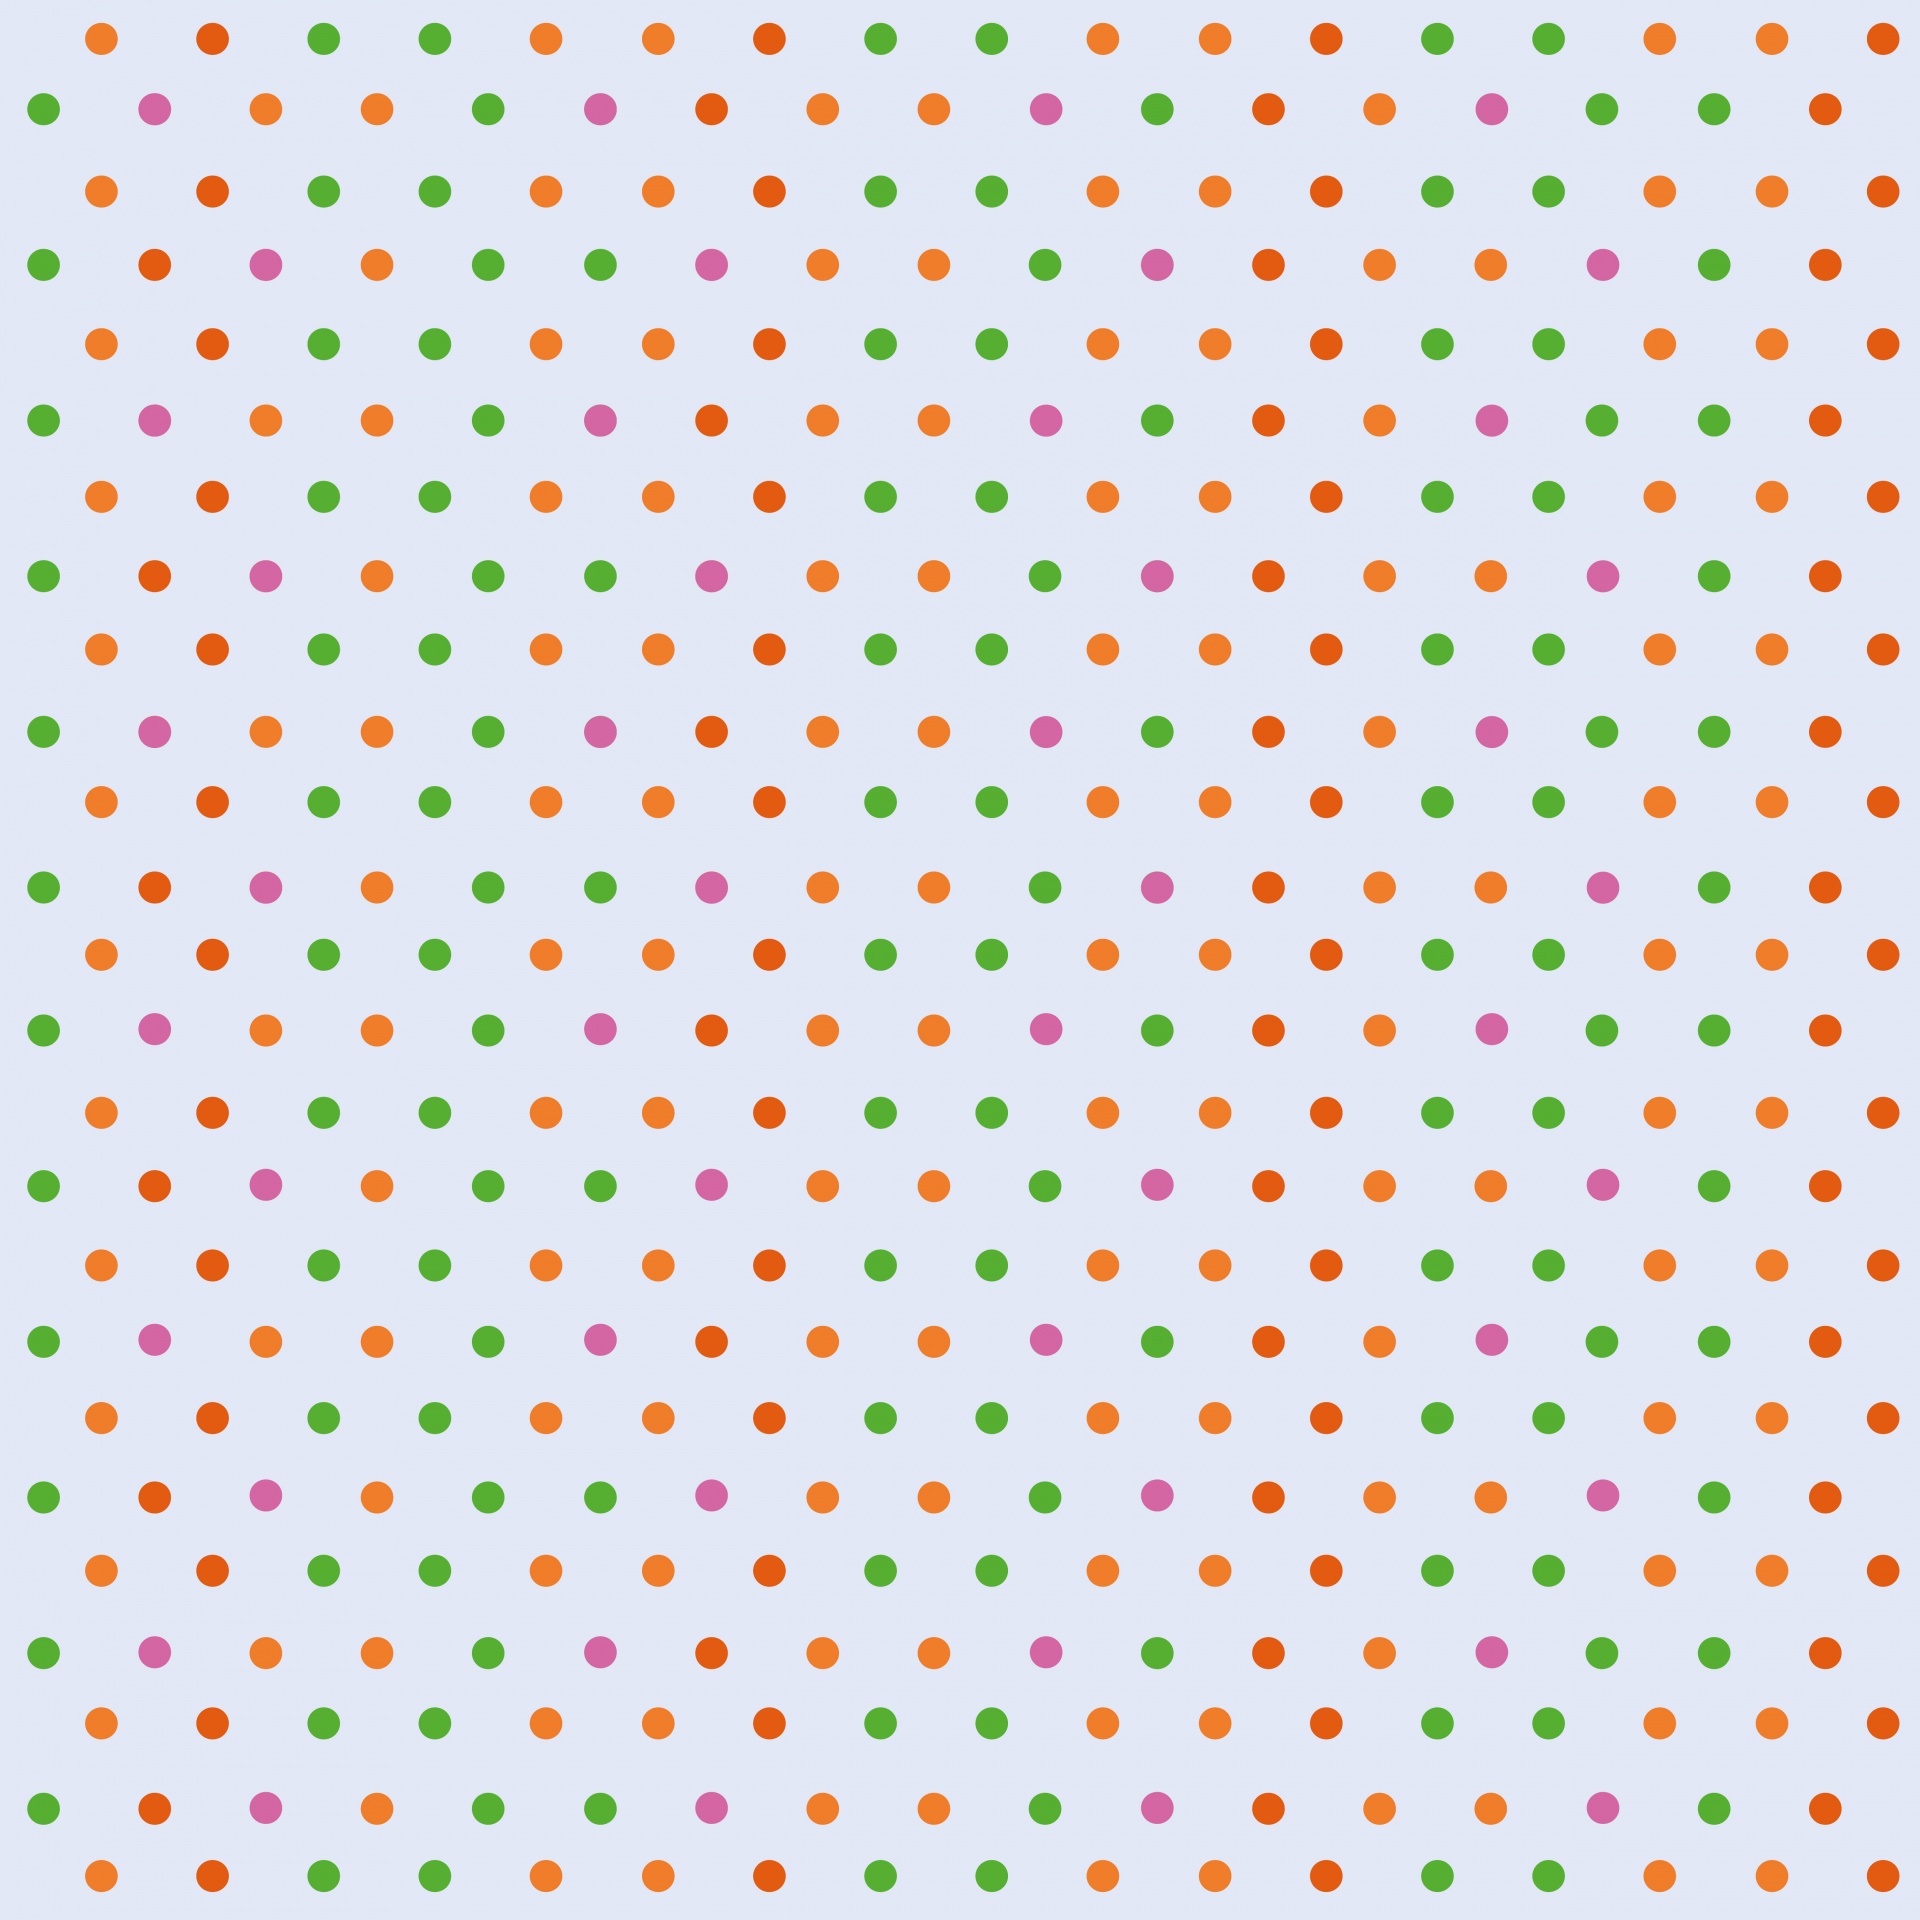 Cute colorful polka dots pattern background in retro, vintage colors